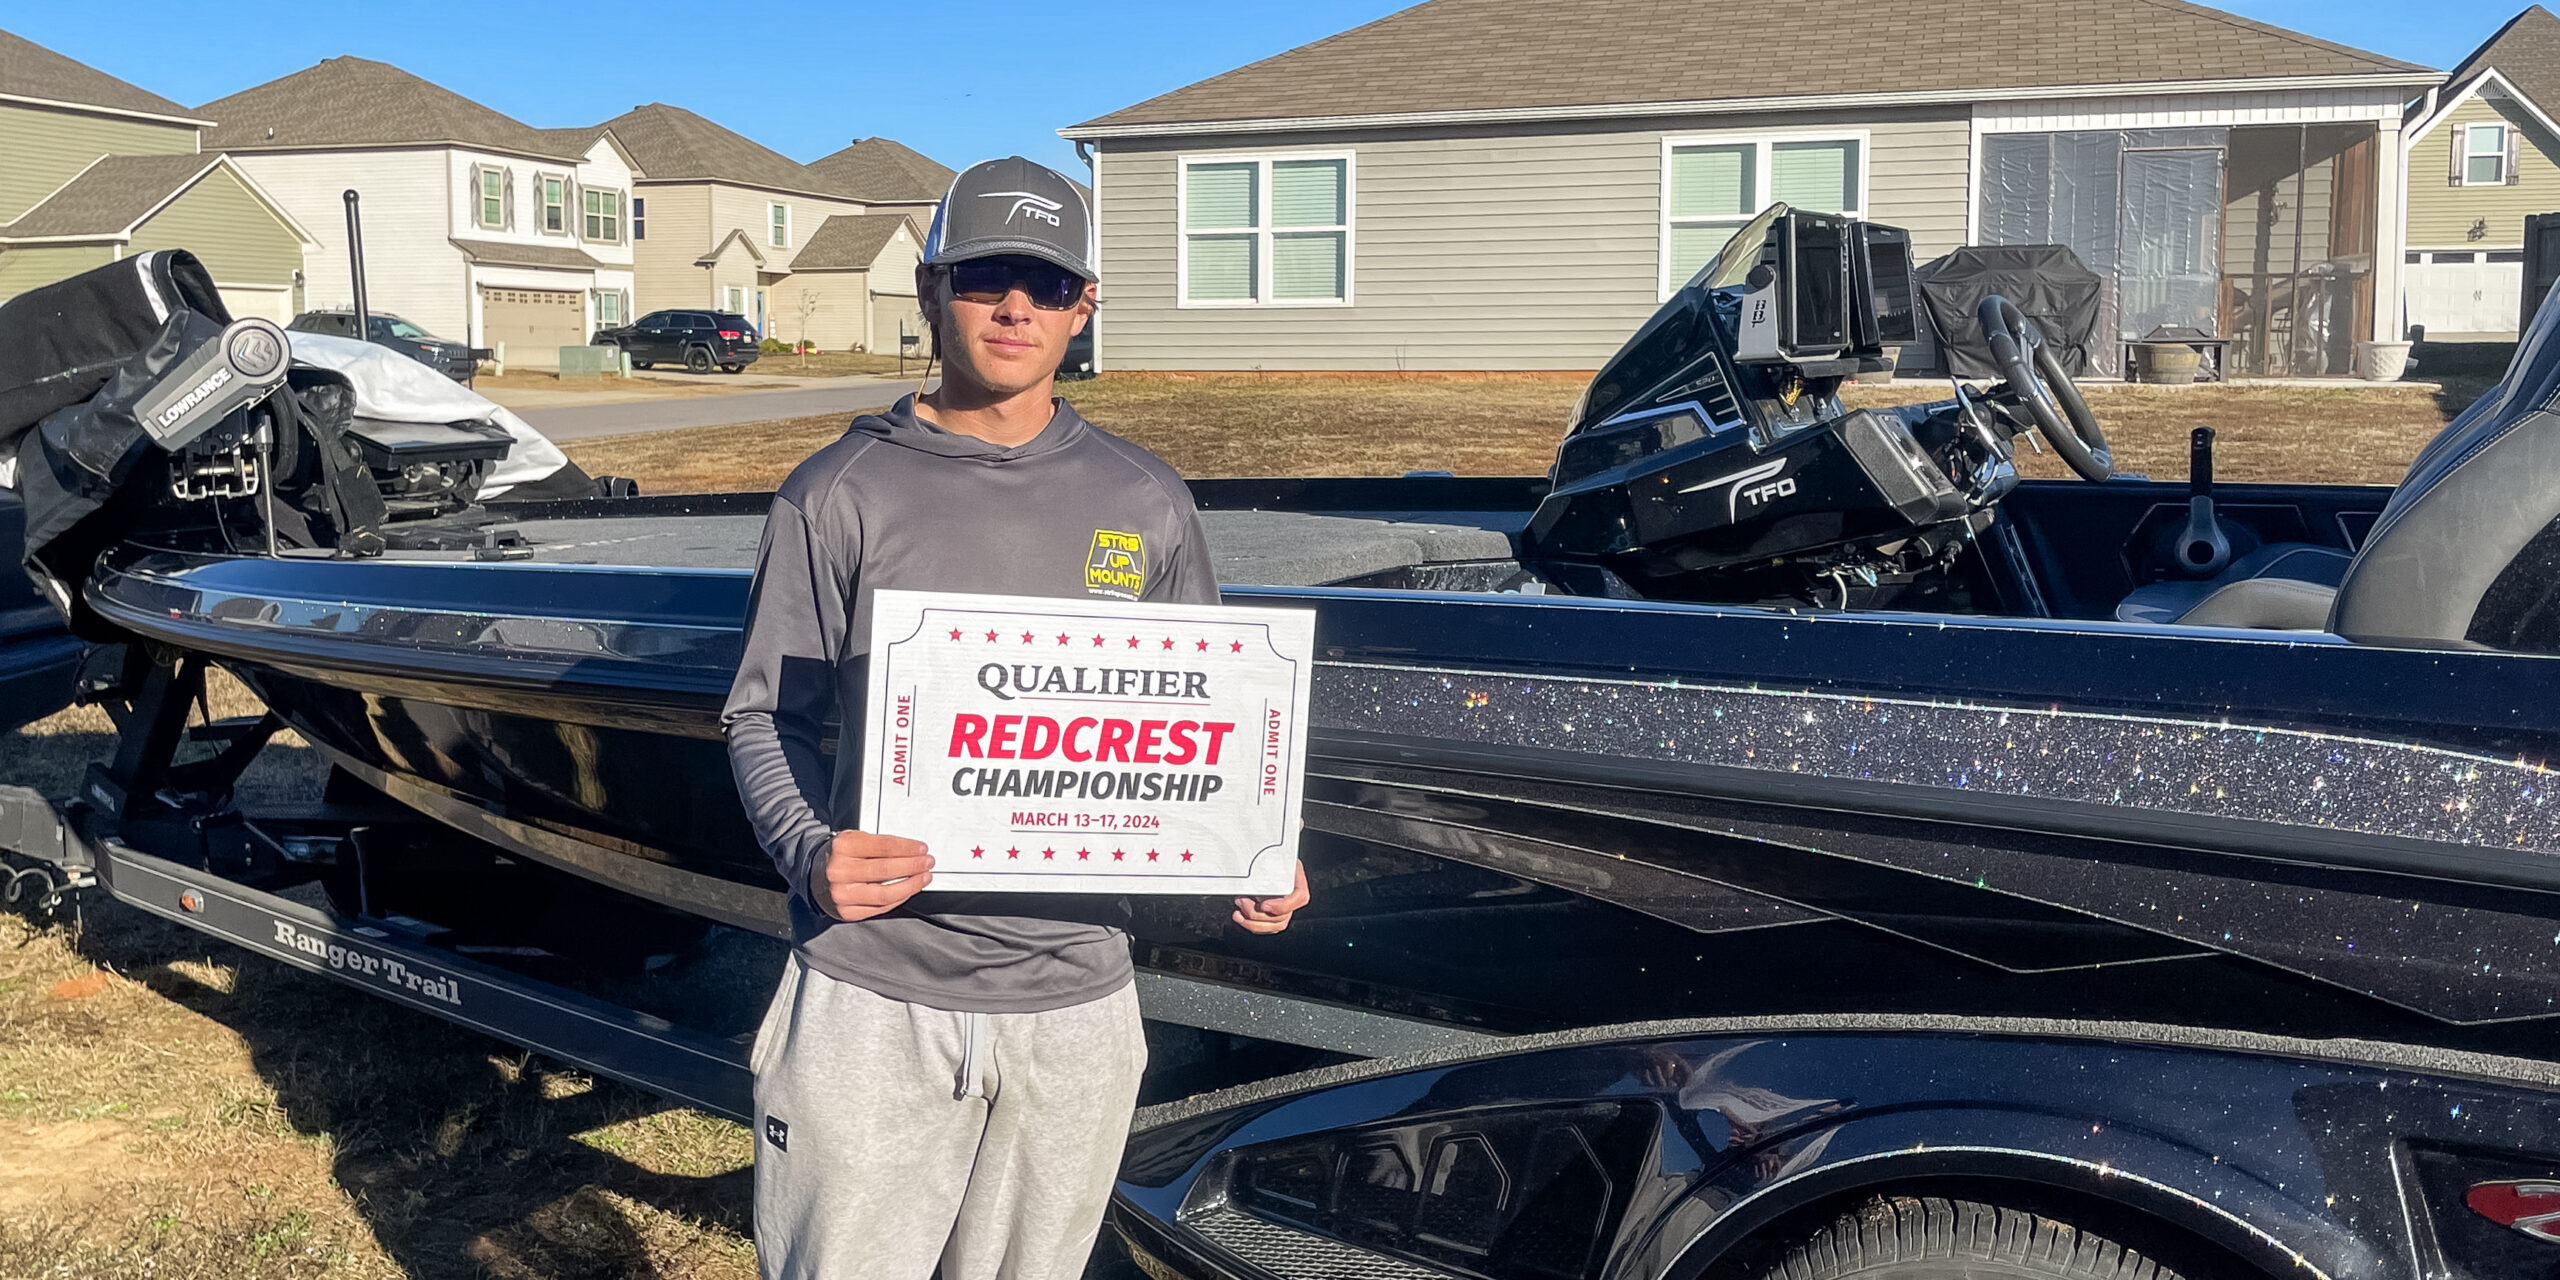 Head makes history as first College Fishing qualifier for REDCREST